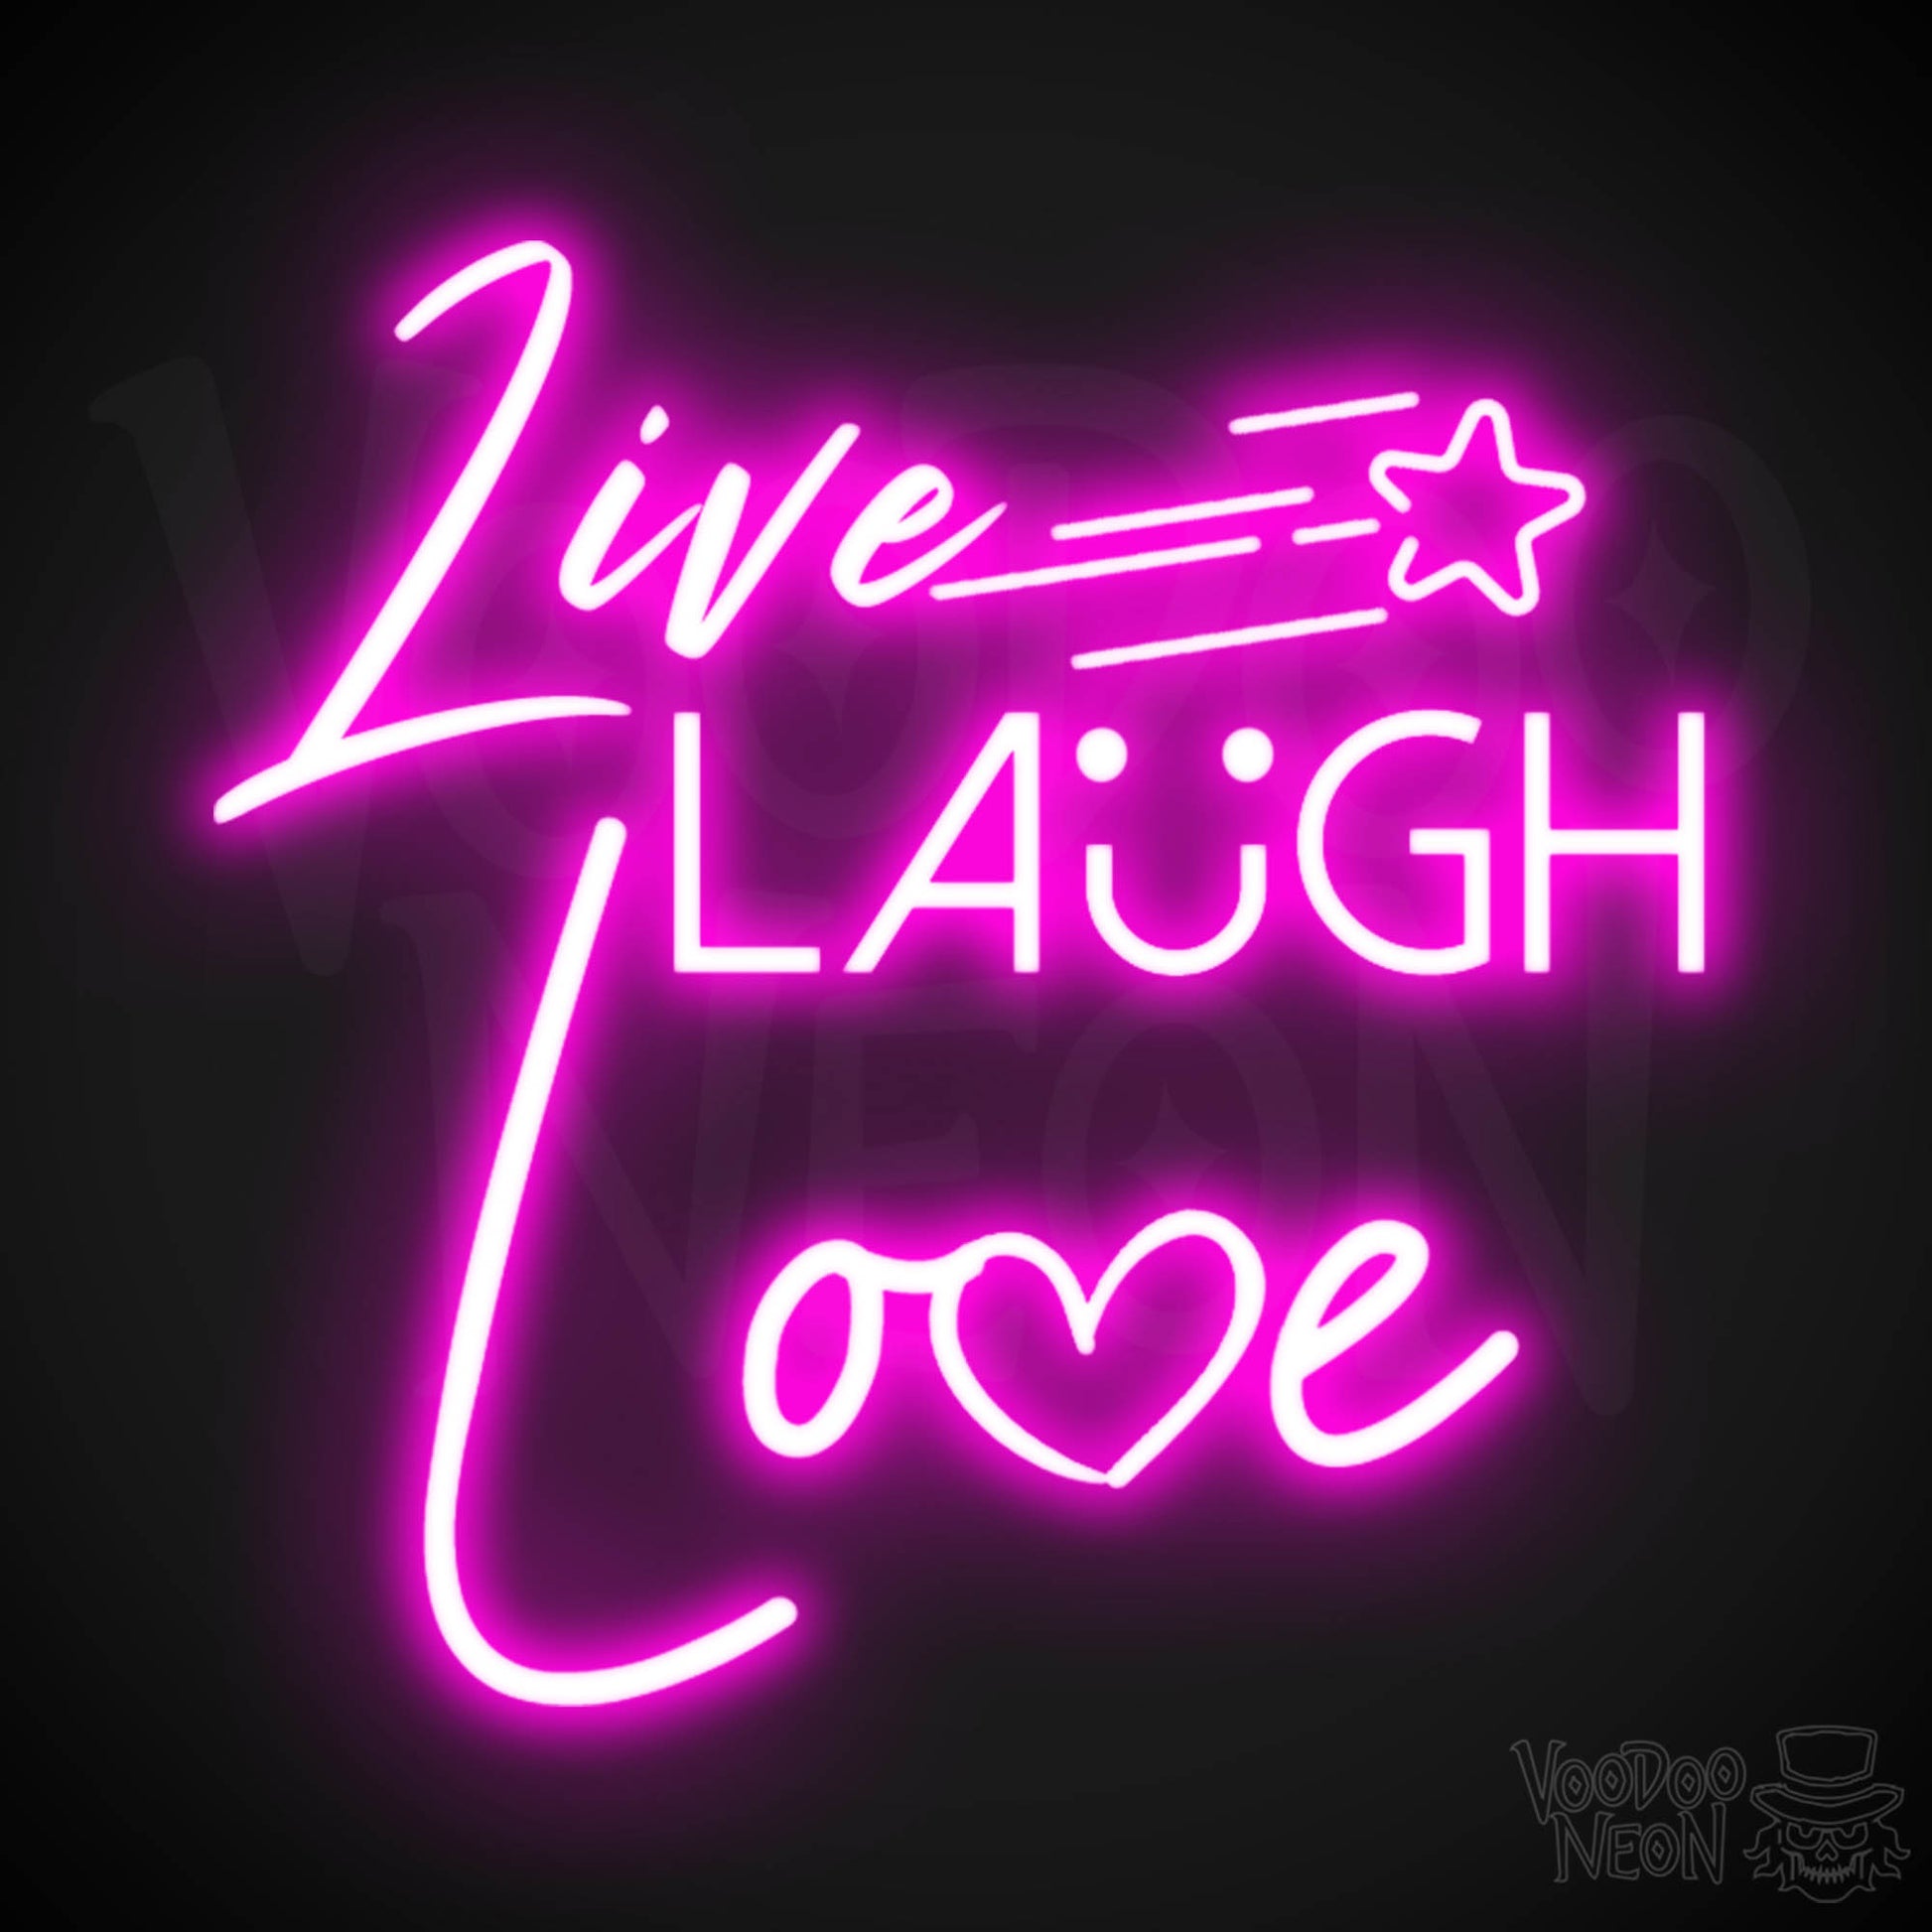 Live Laugh Love Neon Sign - Neon Live Laugh Love Sign - Wall Art - Color Pink